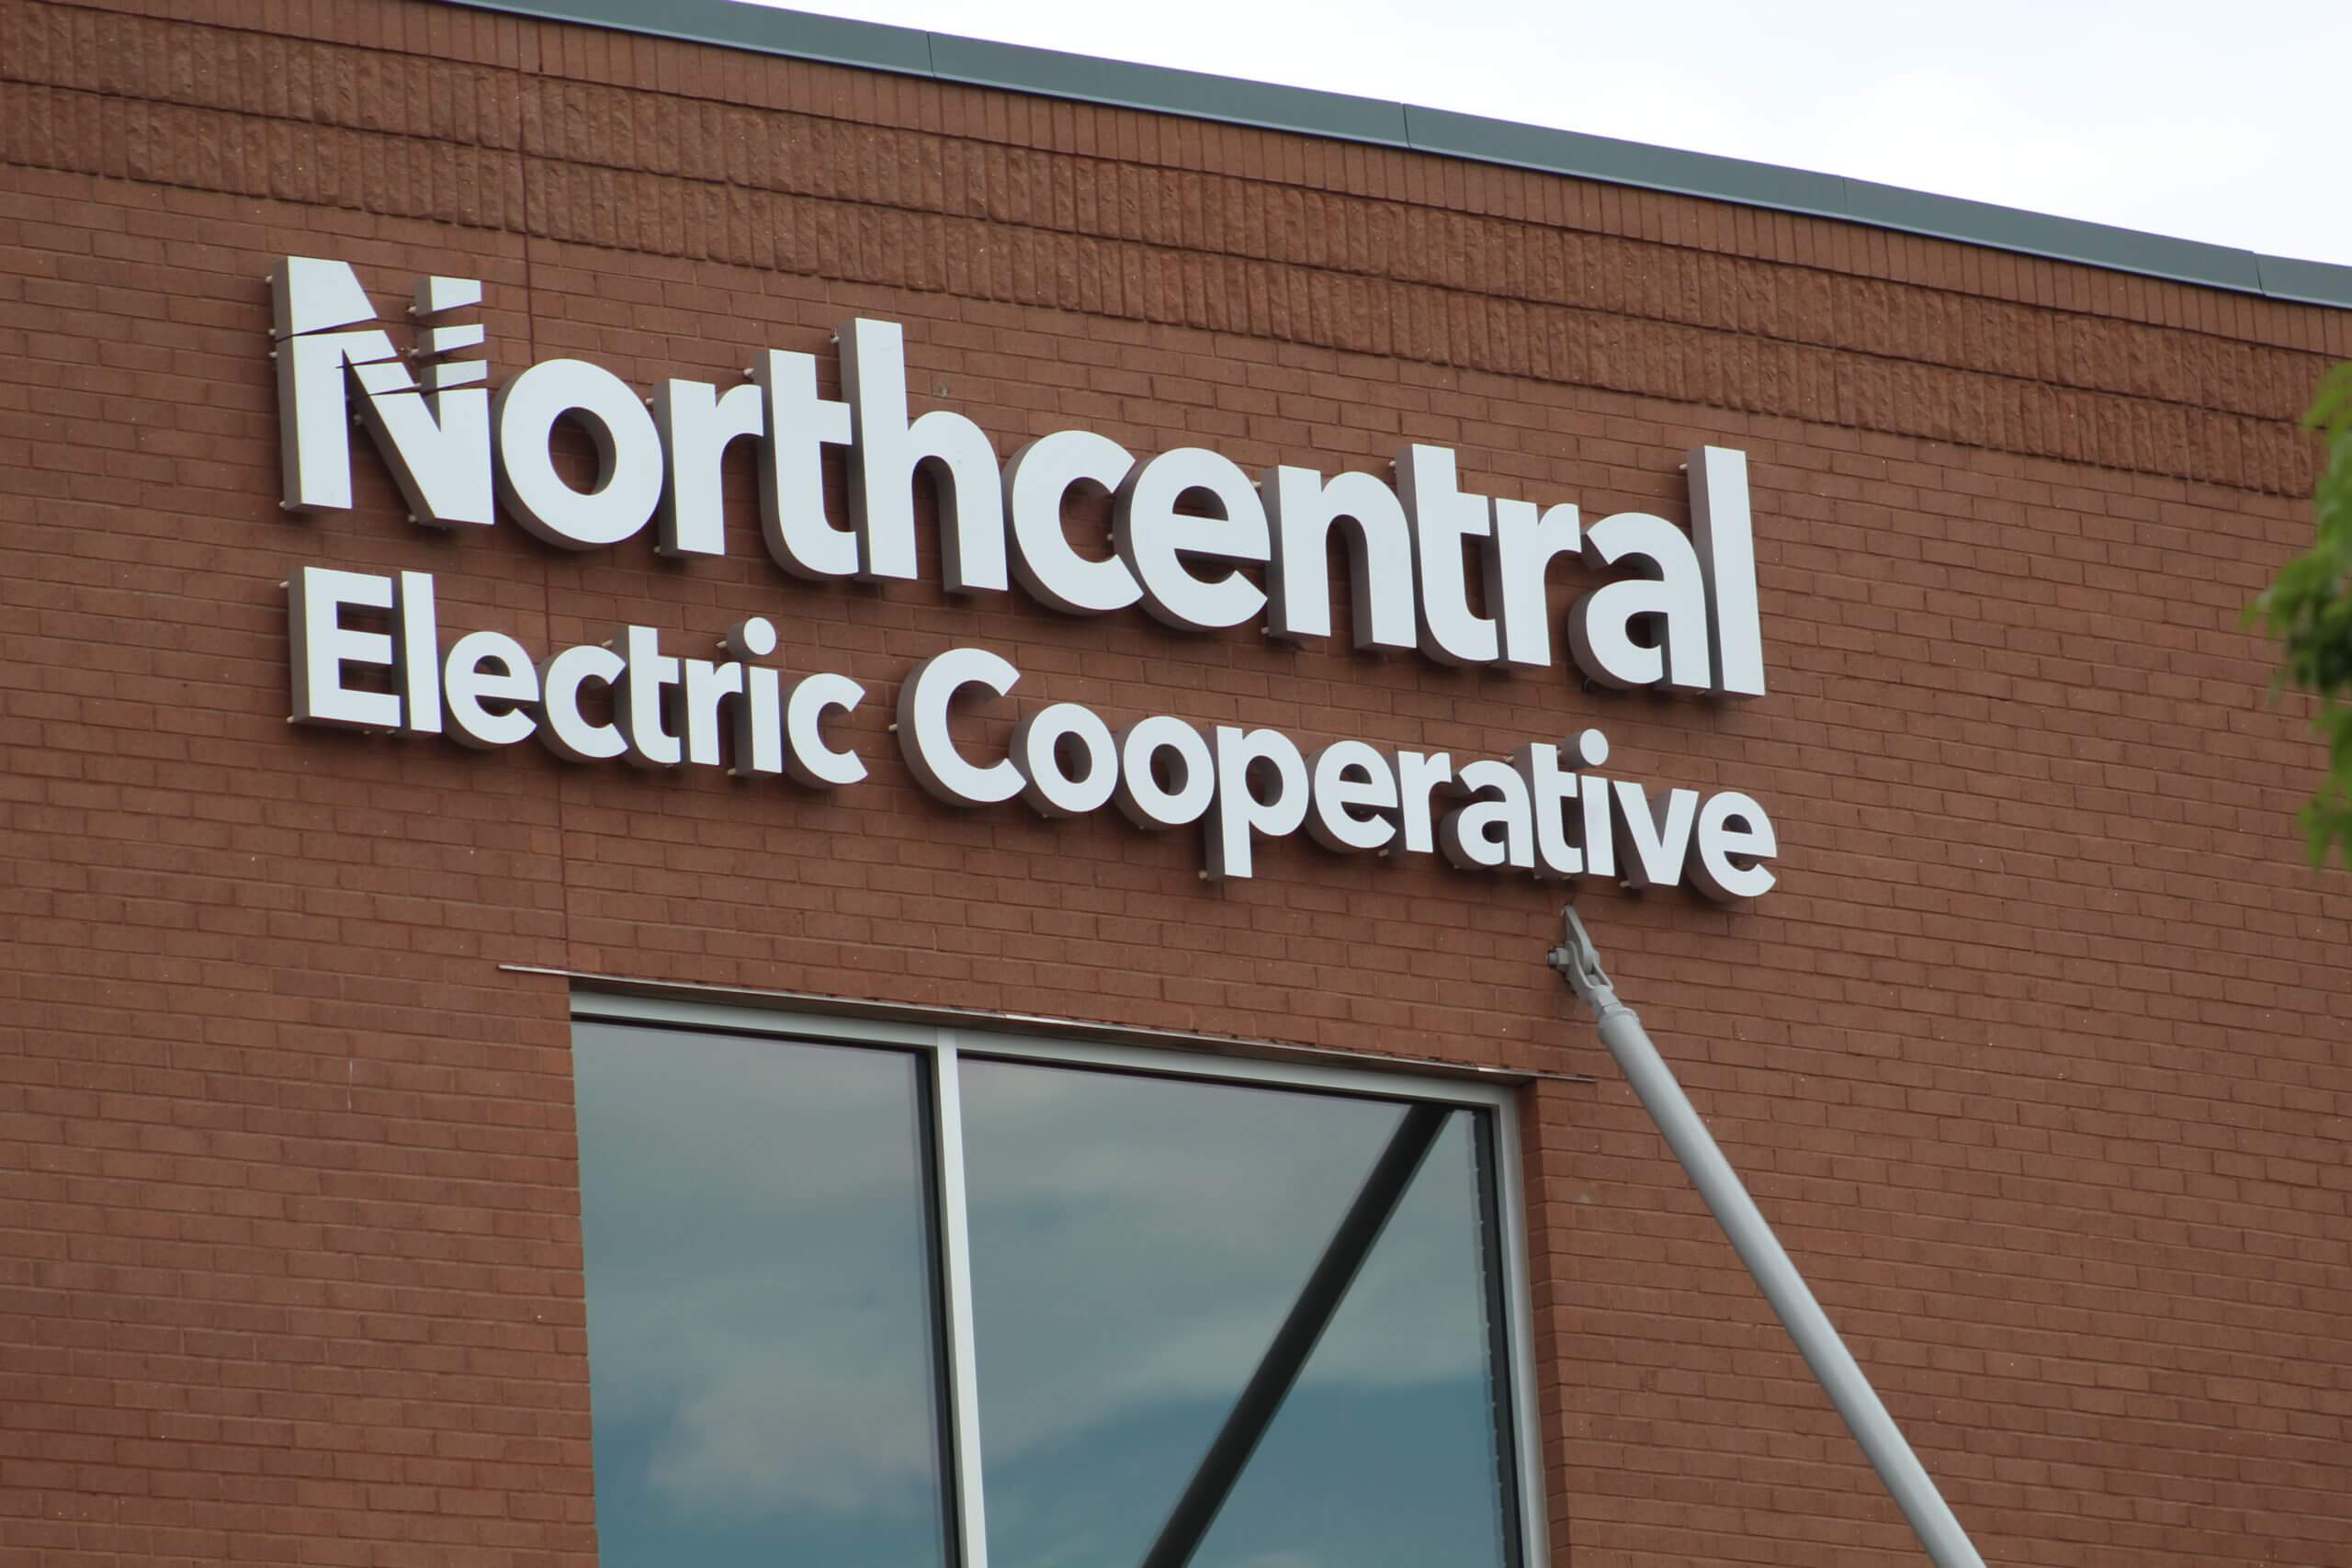 Rolling outages in Northcentral service area